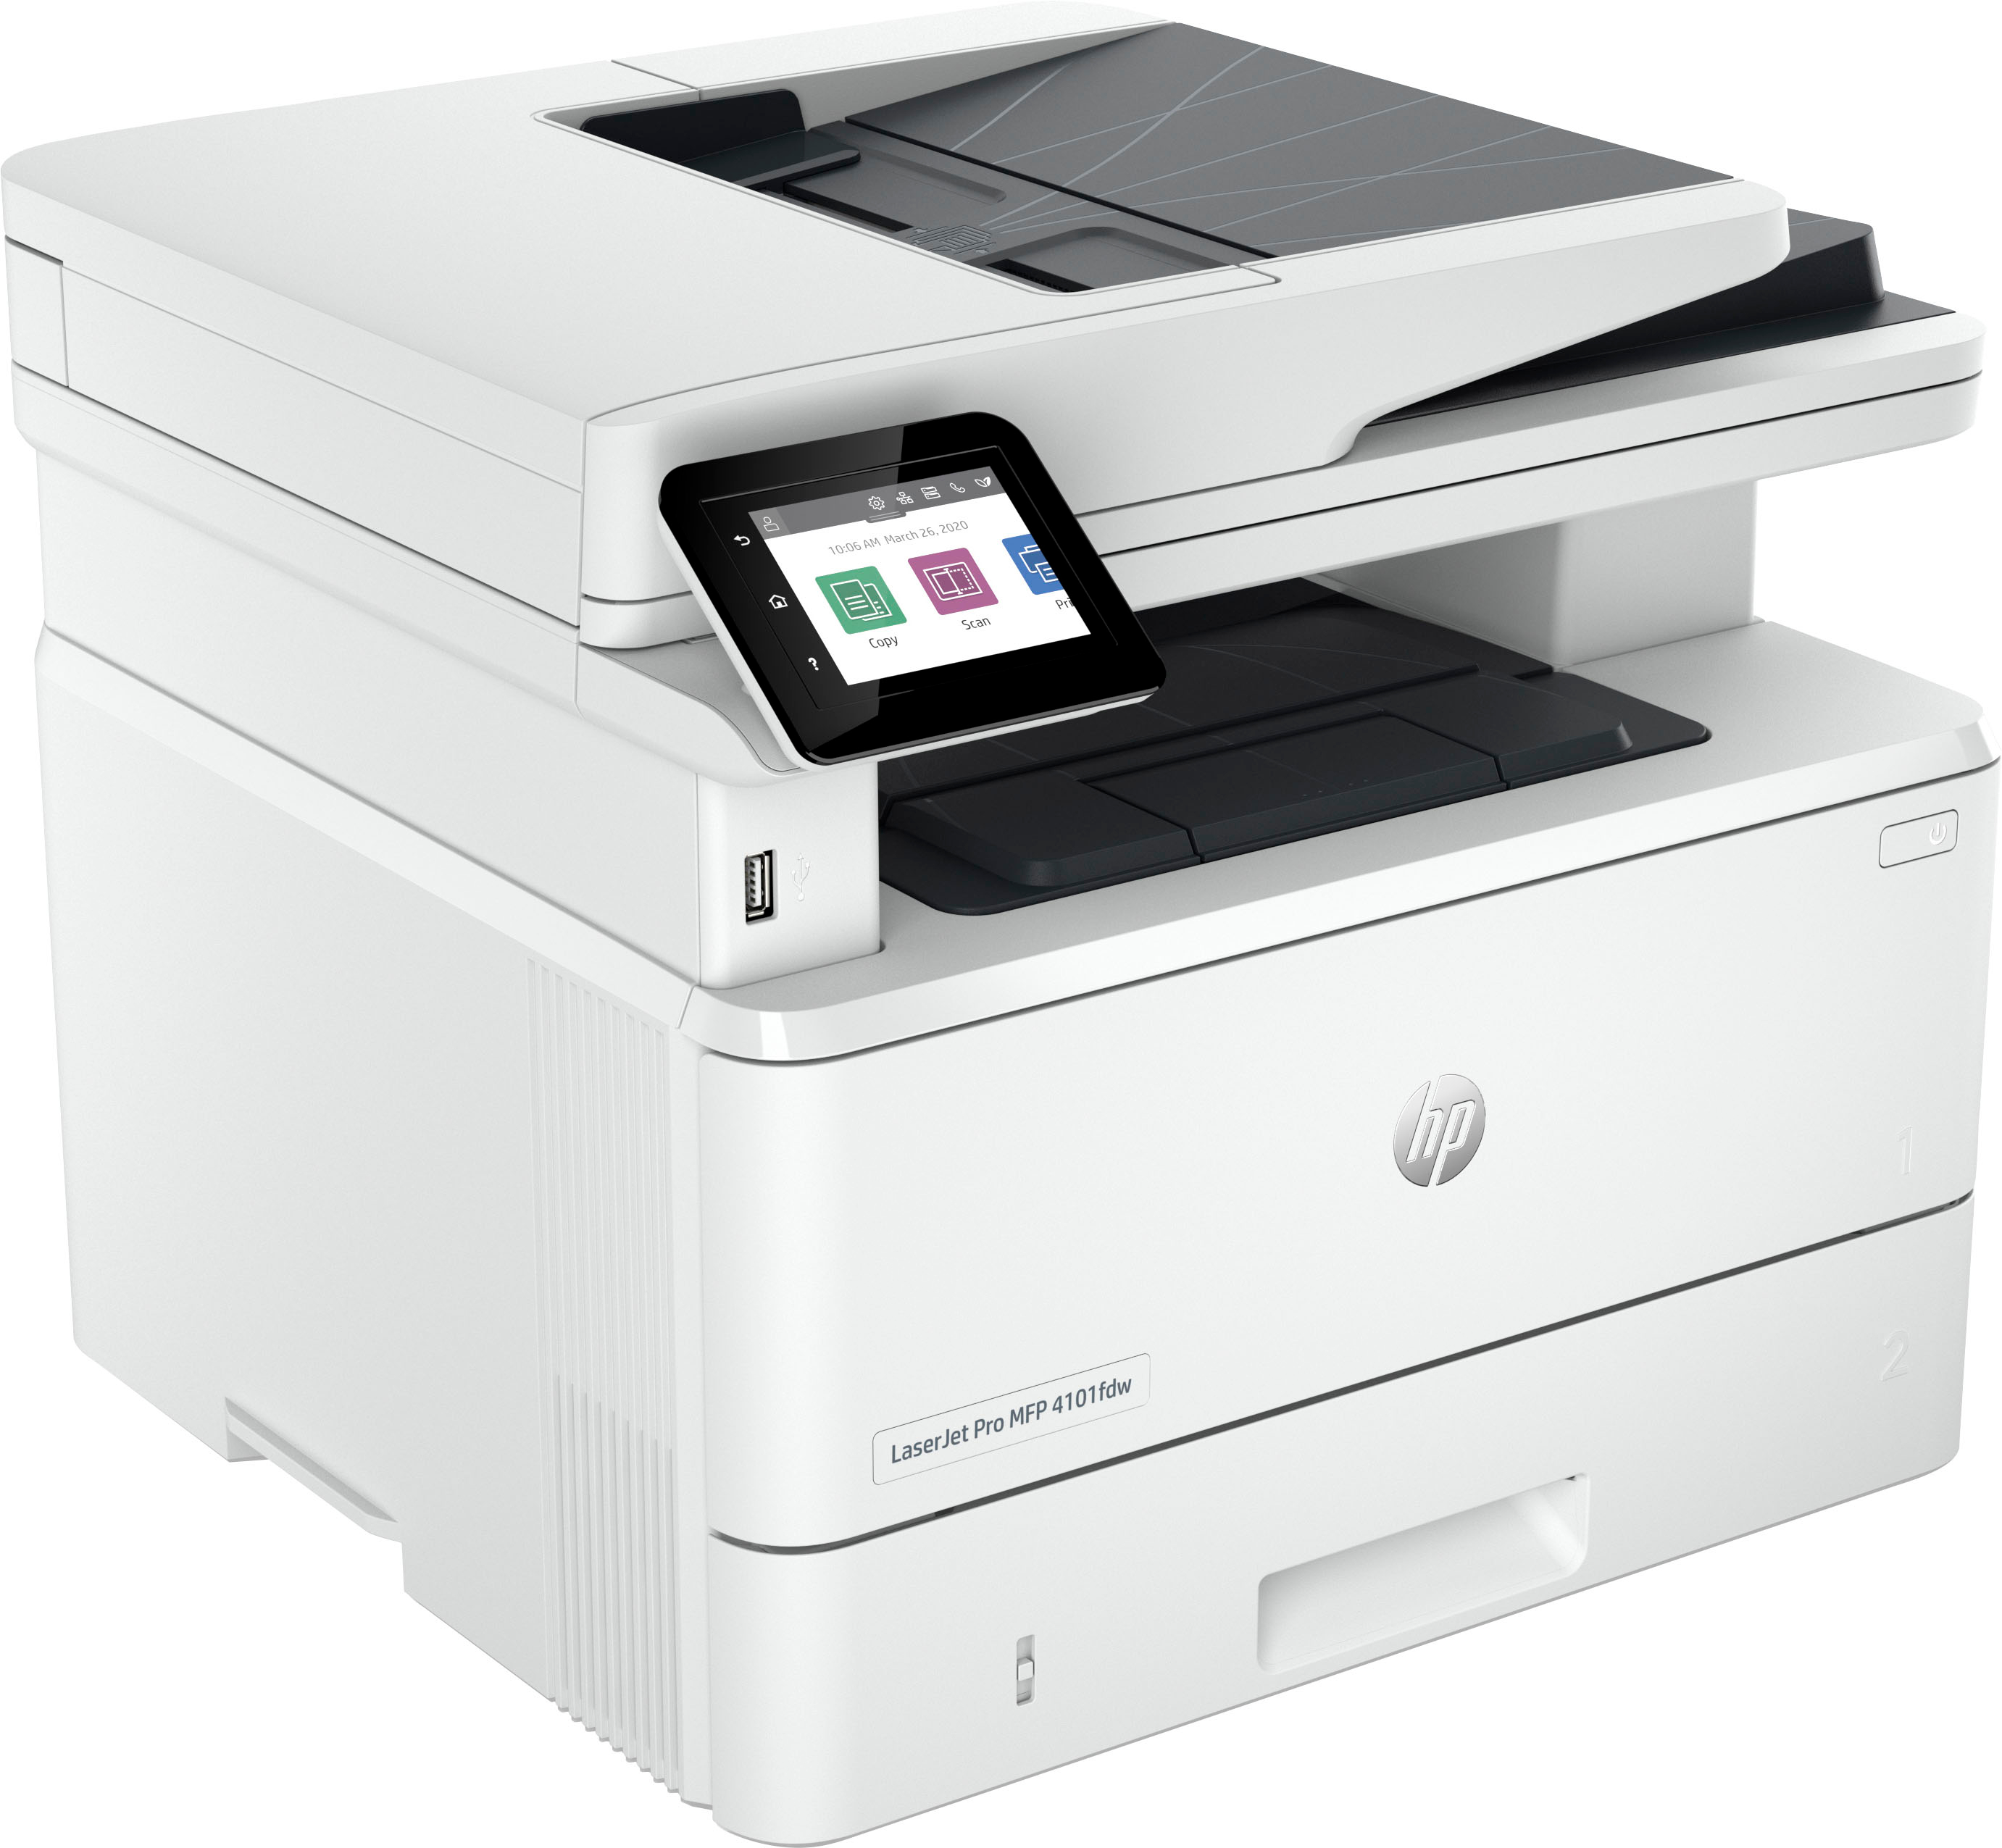 Left View: HP - LaserJet Pro MFP 4101fdw Wireless Black-and-White All-in-One Laser Printer - White